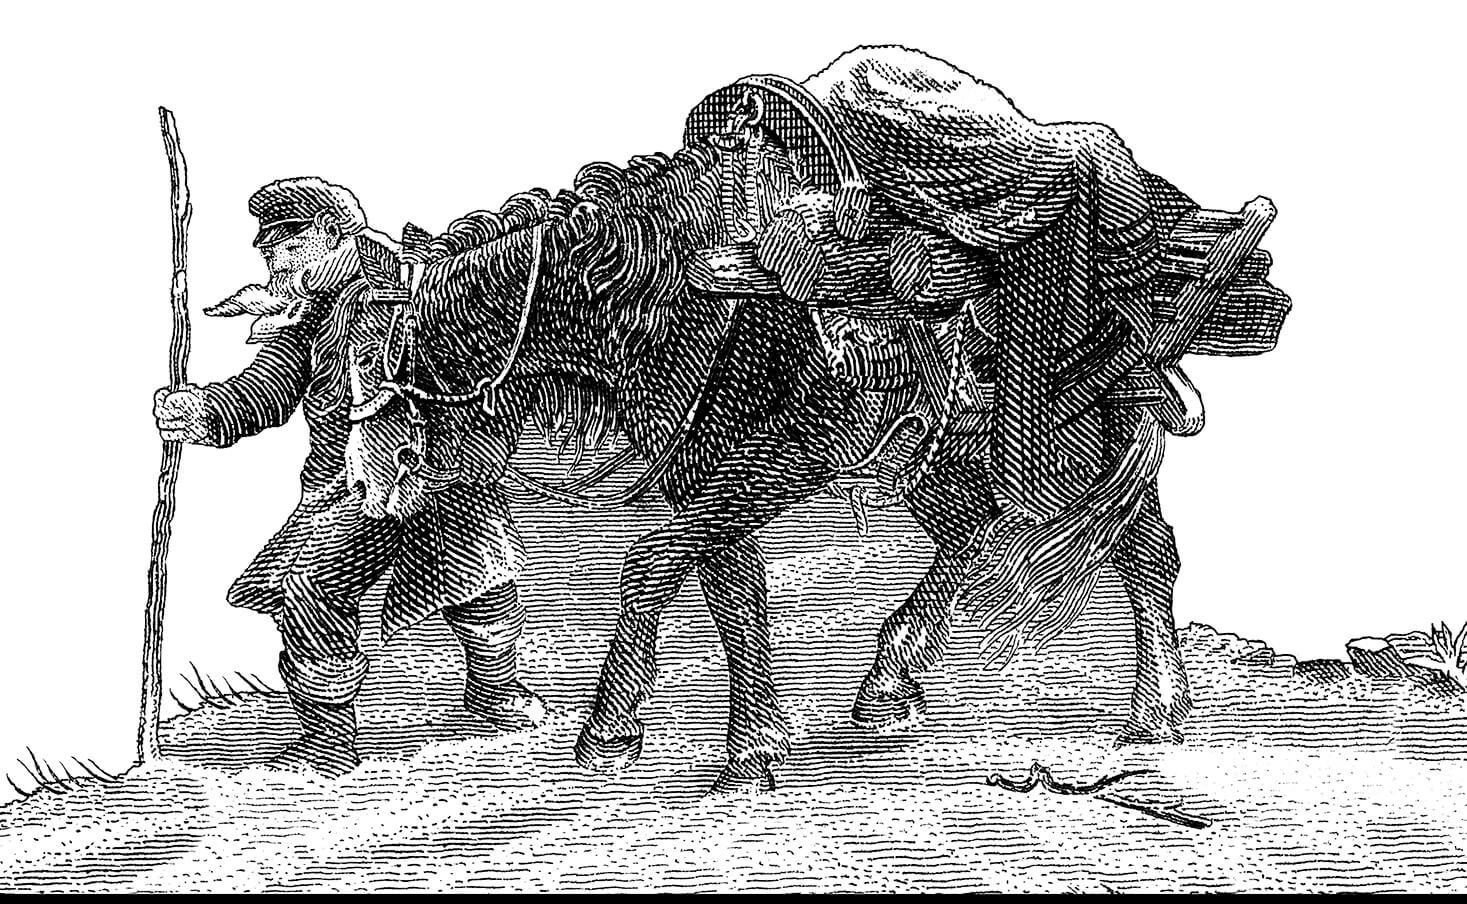 Black and white illustration of a horse carrying a pack of goods and a man walking next to him with a walking stick. There is snow on the ground.